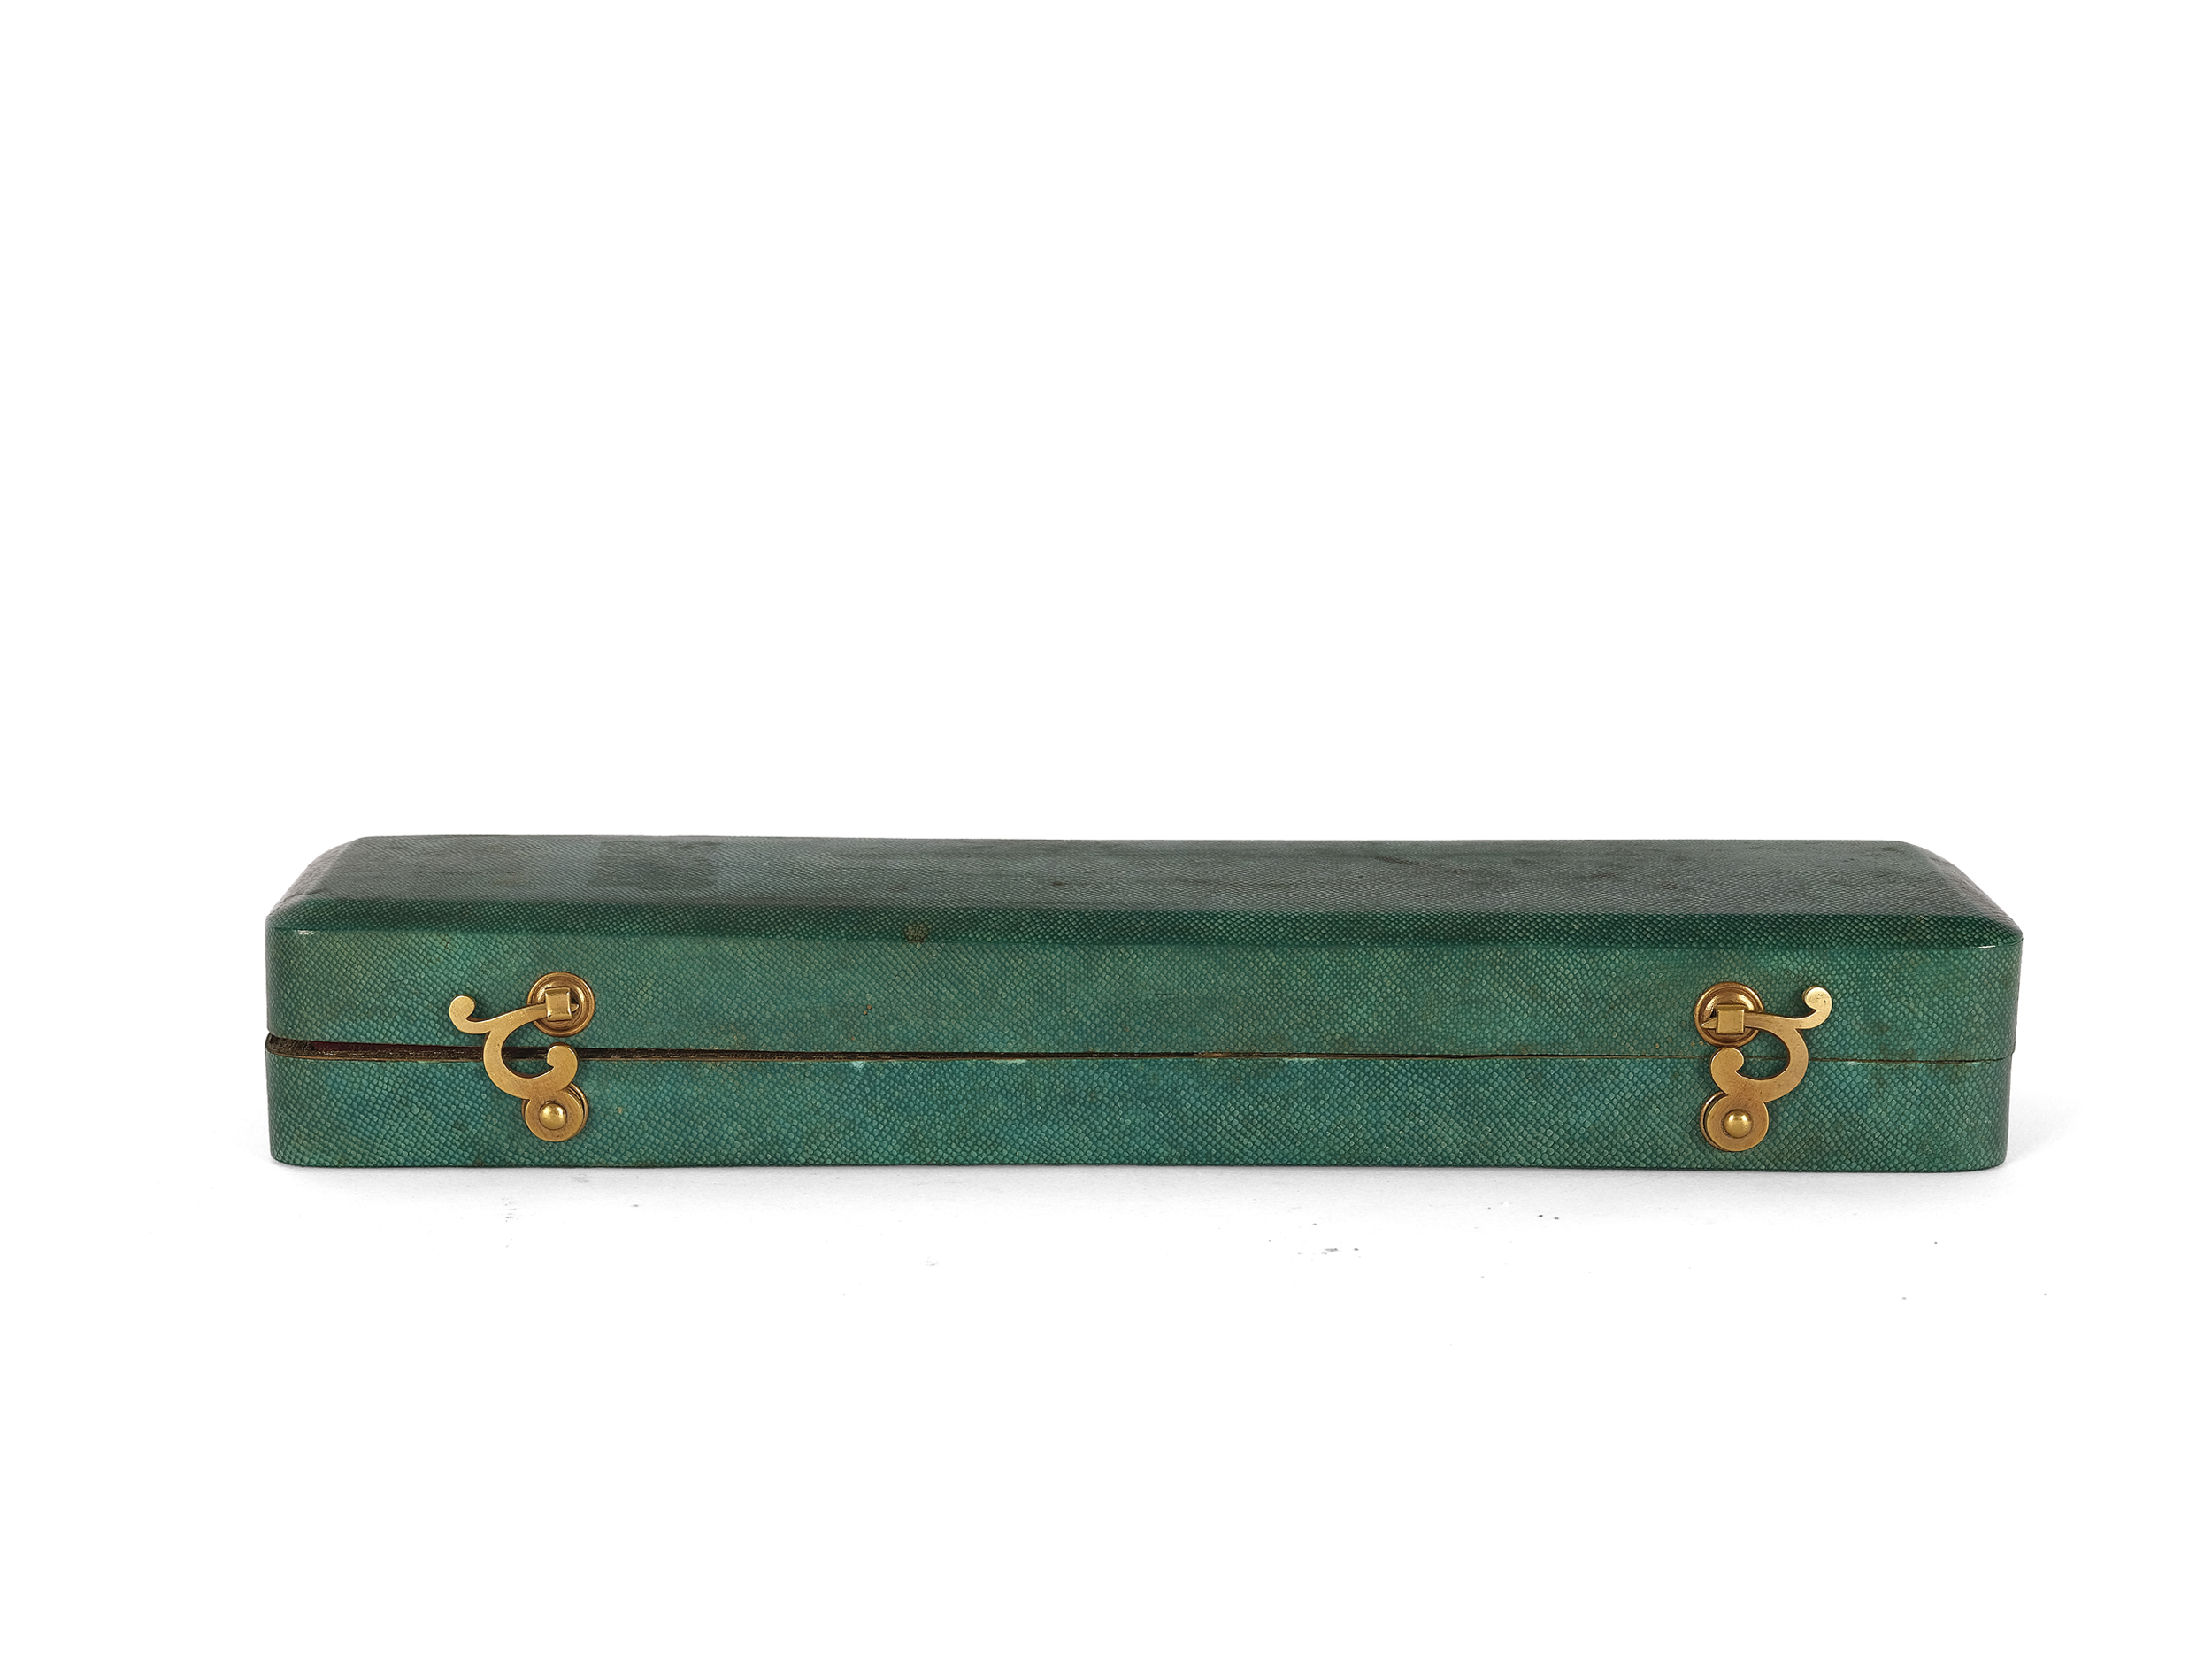 Travelling cutlery in a case, France, late 18th century - Image 5 of 5